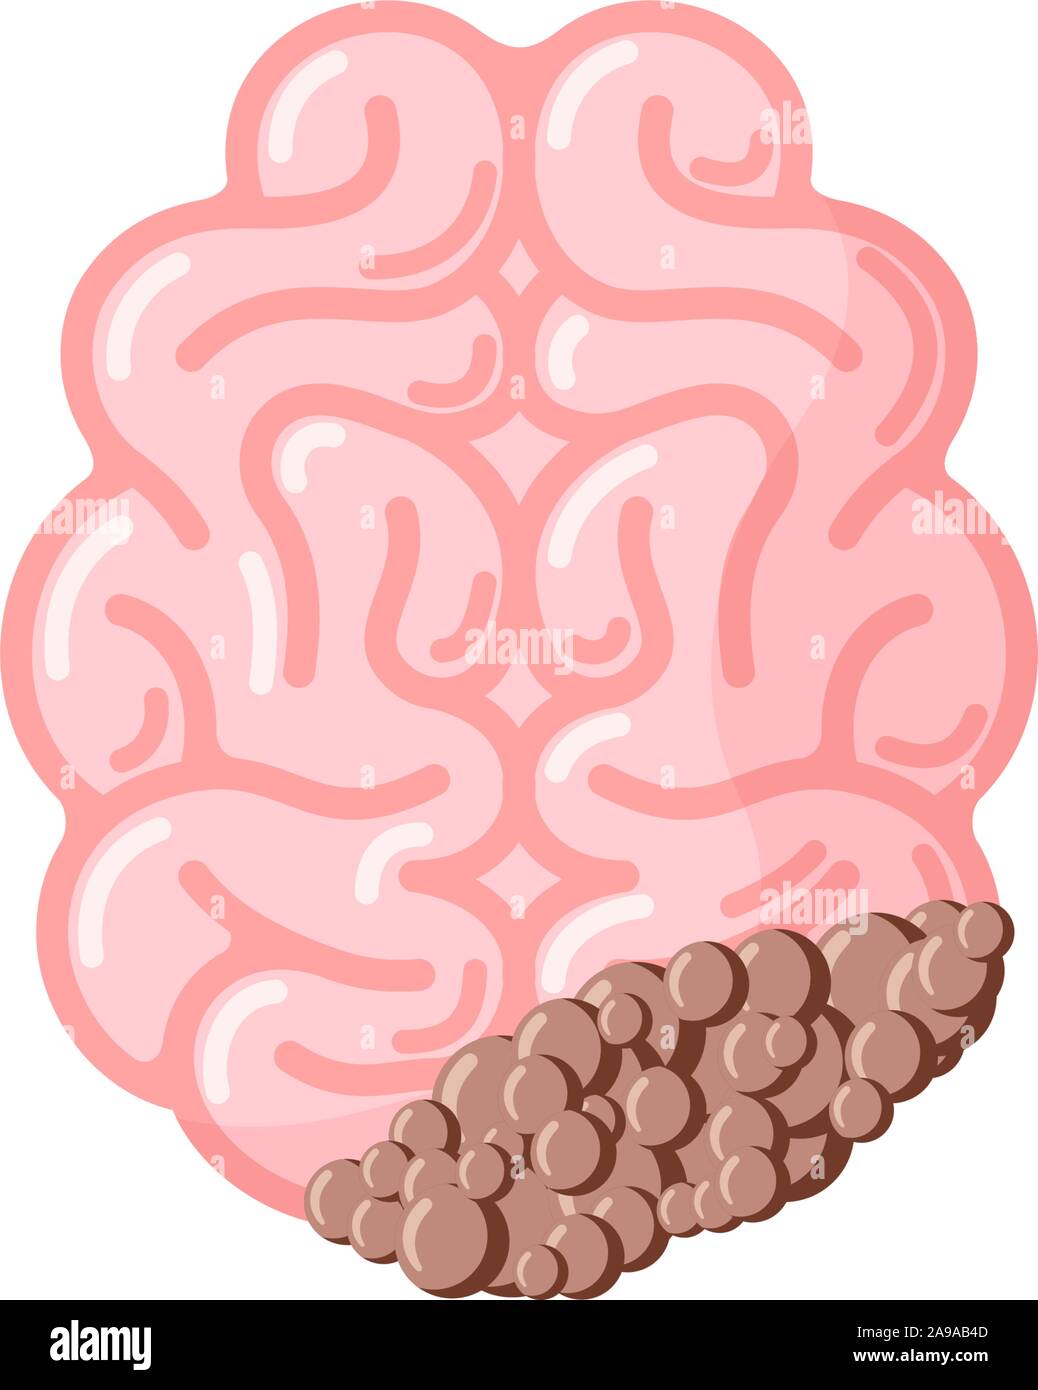 Human brain with cancer tumor. Sick suffering damage central nervous system organ. Vector eps illustration Stock Vector